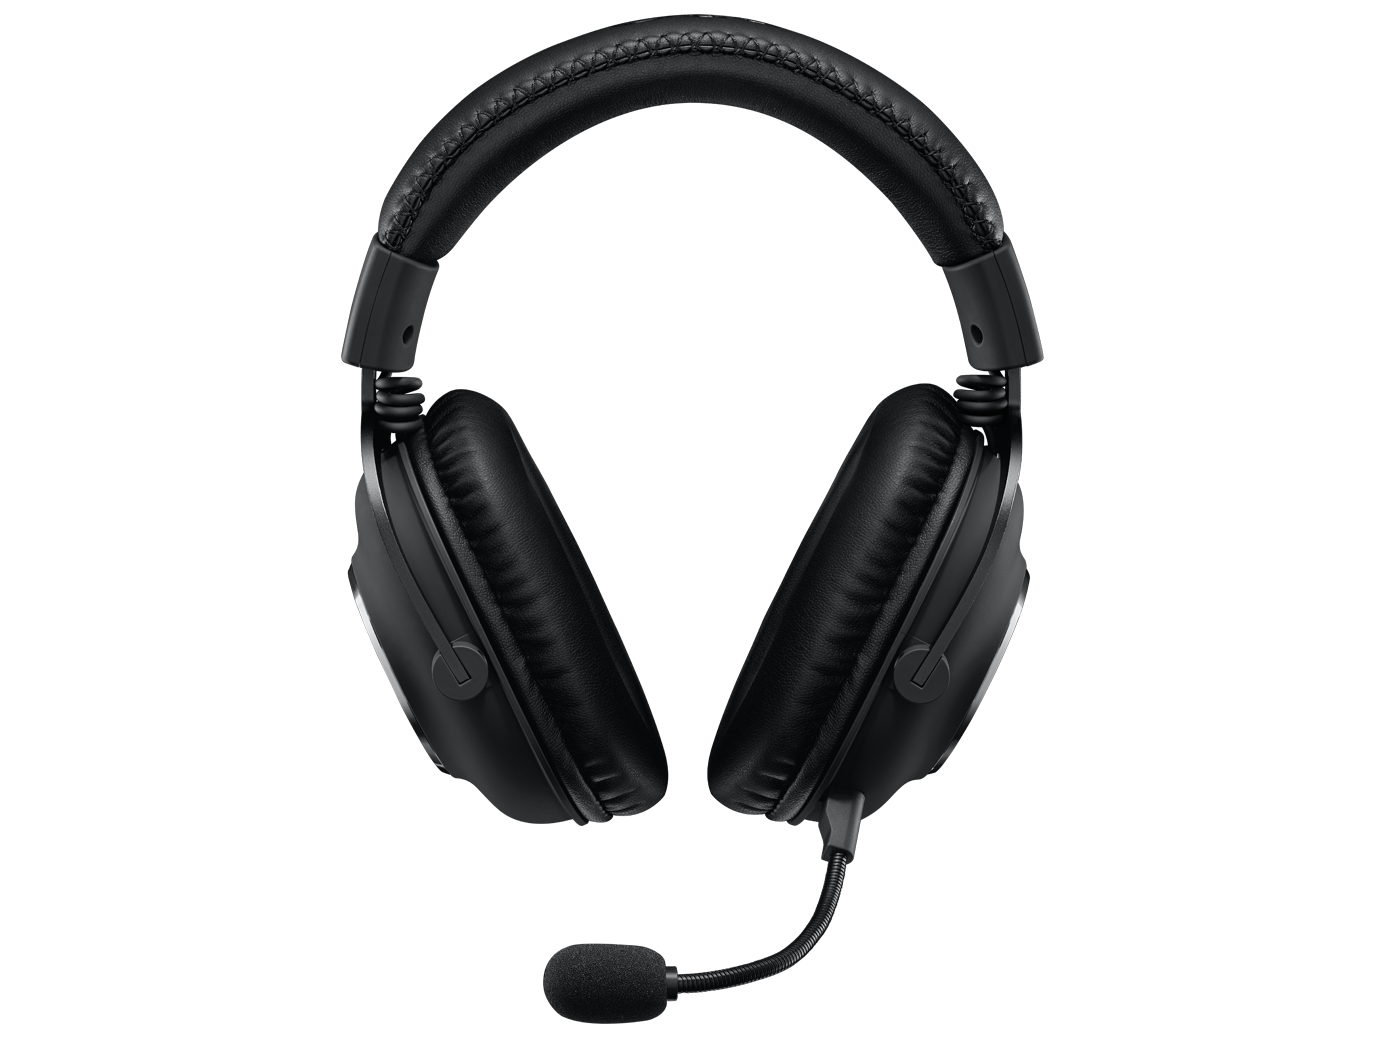 Image of PRO X Gaming Headset Two Year Extended Warranty